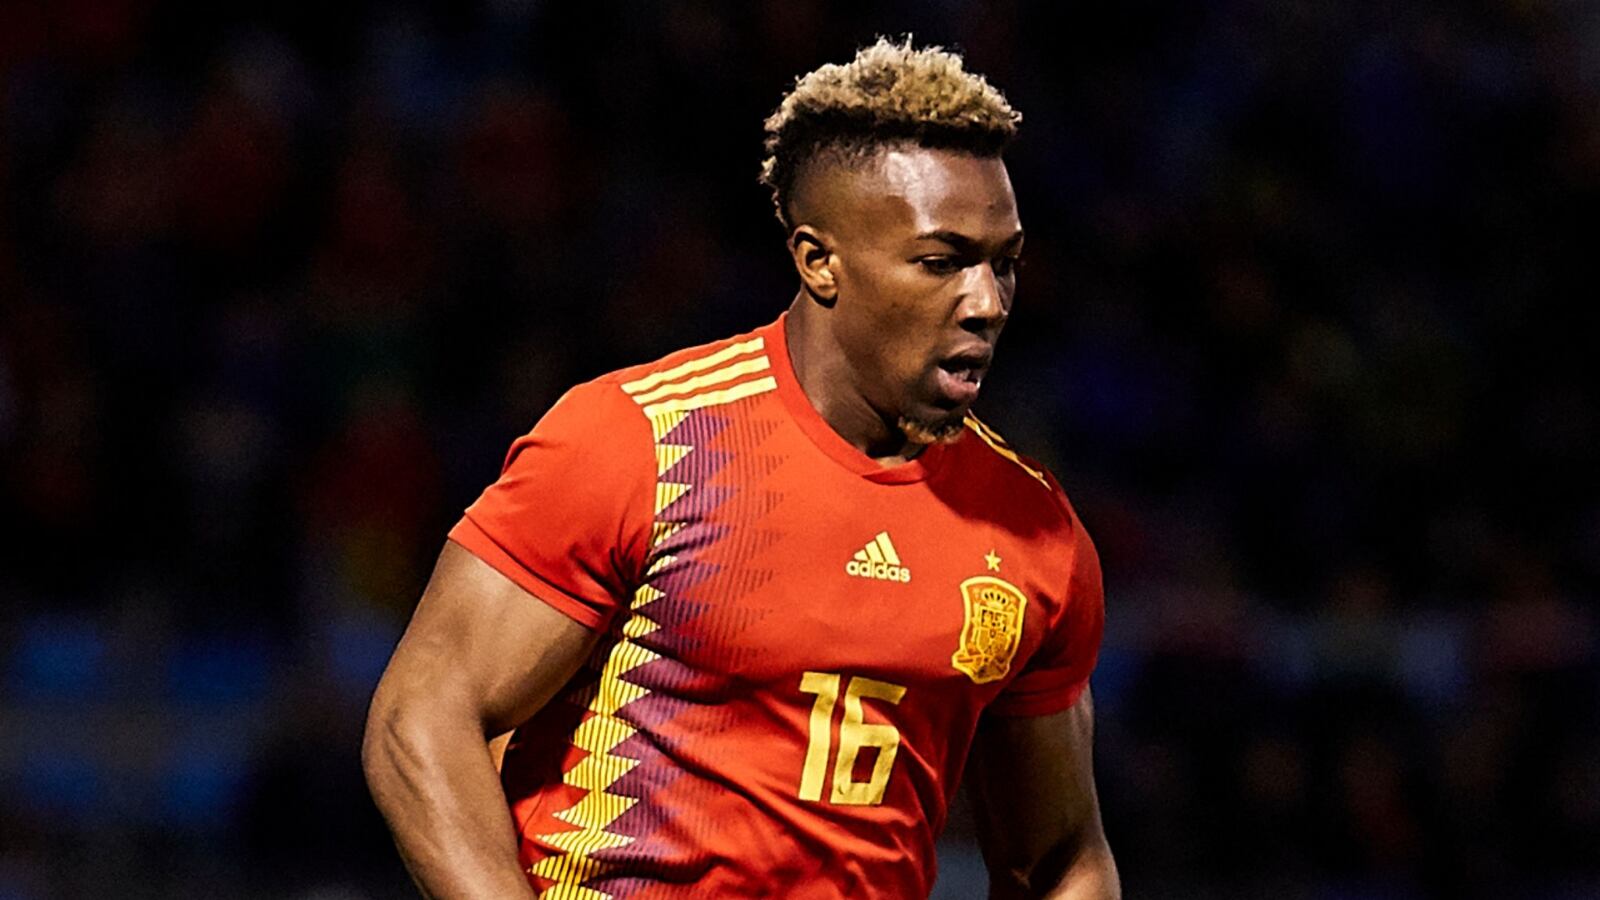 Adama Traore's secret to having that great body structure